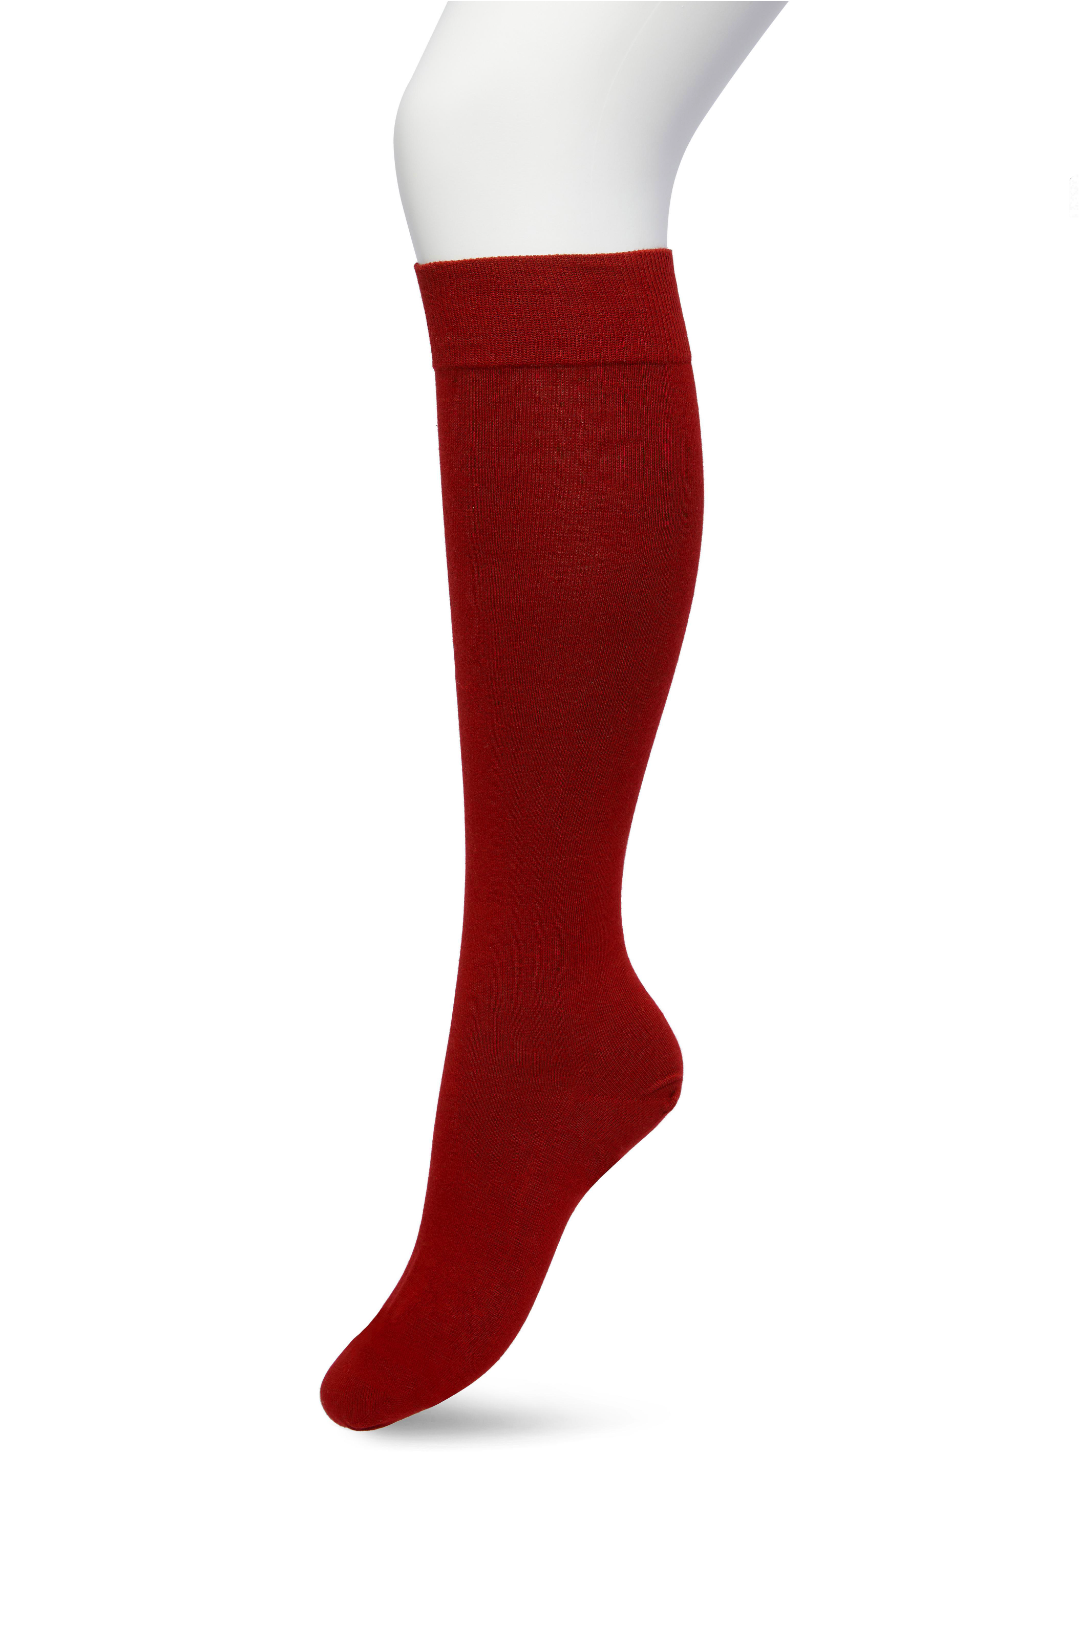 Bonnie Doon 83430 Cotton Knee-Highs - Maroon (red) soft and plain cotton knee length socks with a shaped heel, flat toe seam and deep elasticated comfort cuff.